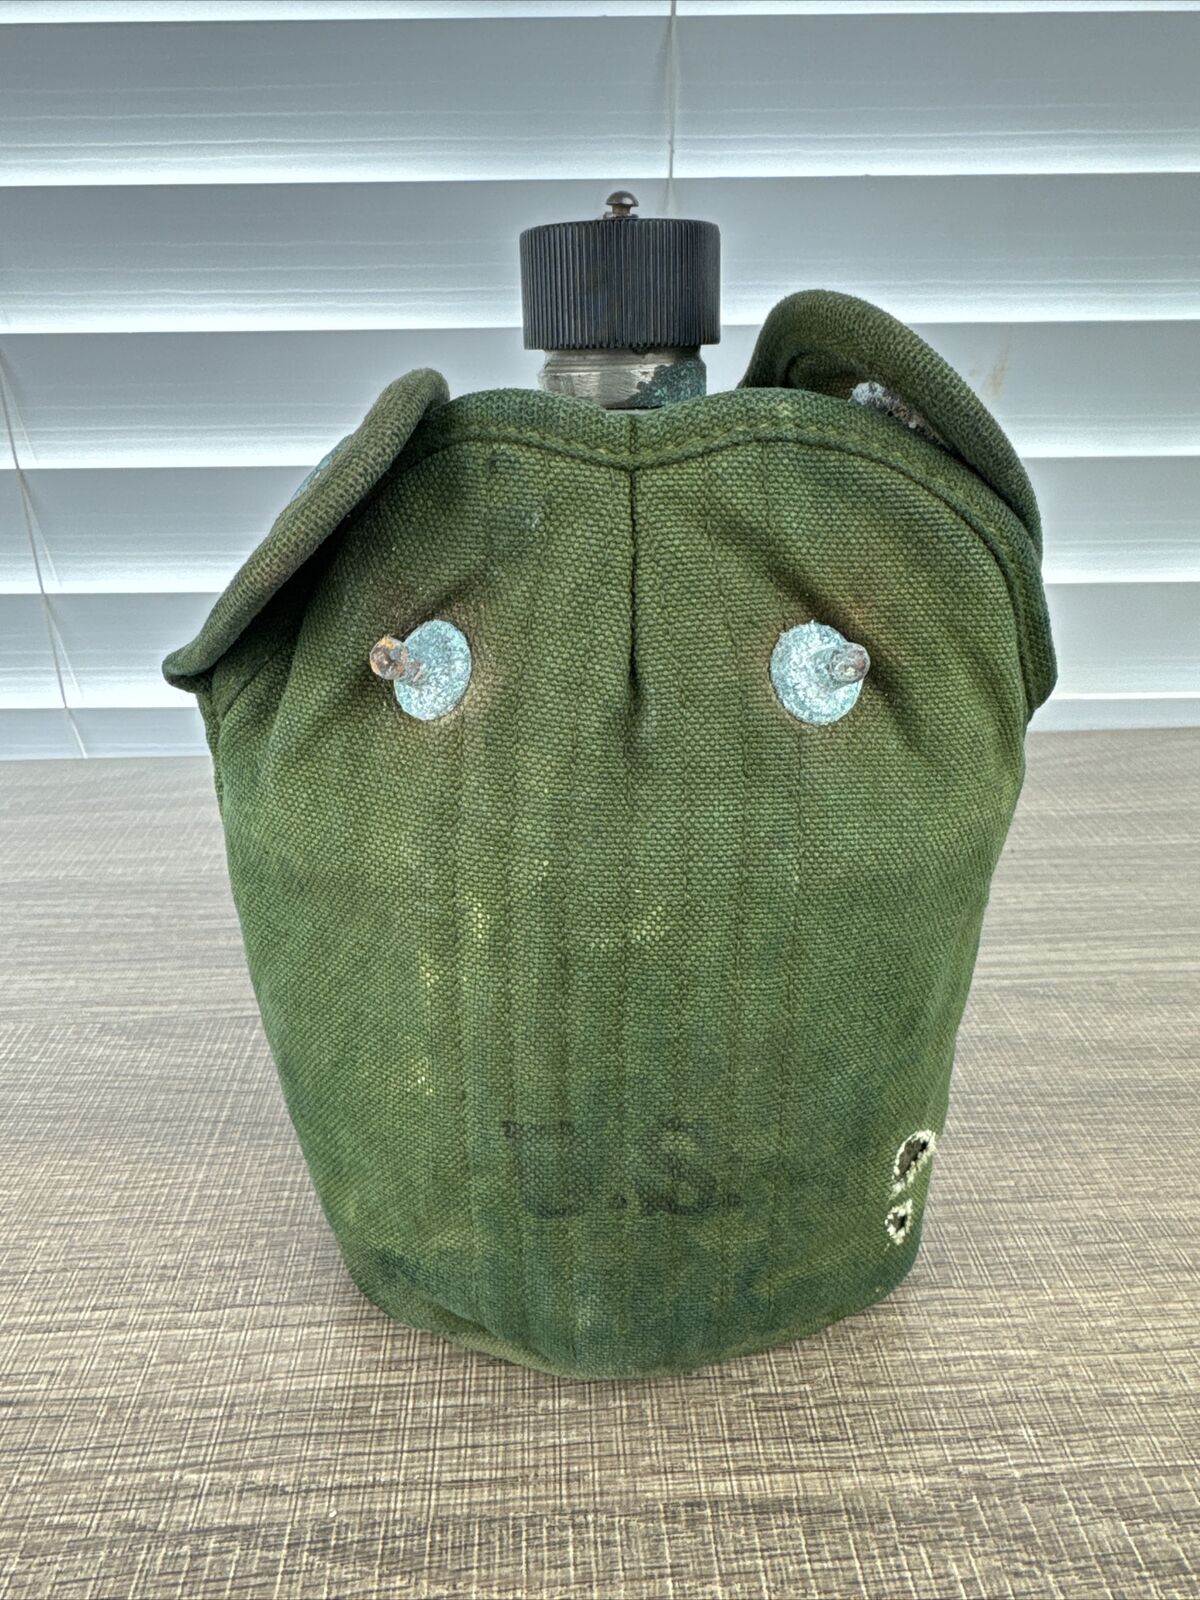 WWII US Army Canteen Complete-RARE Flat Top Cap. Can Dated 1942, Original issue